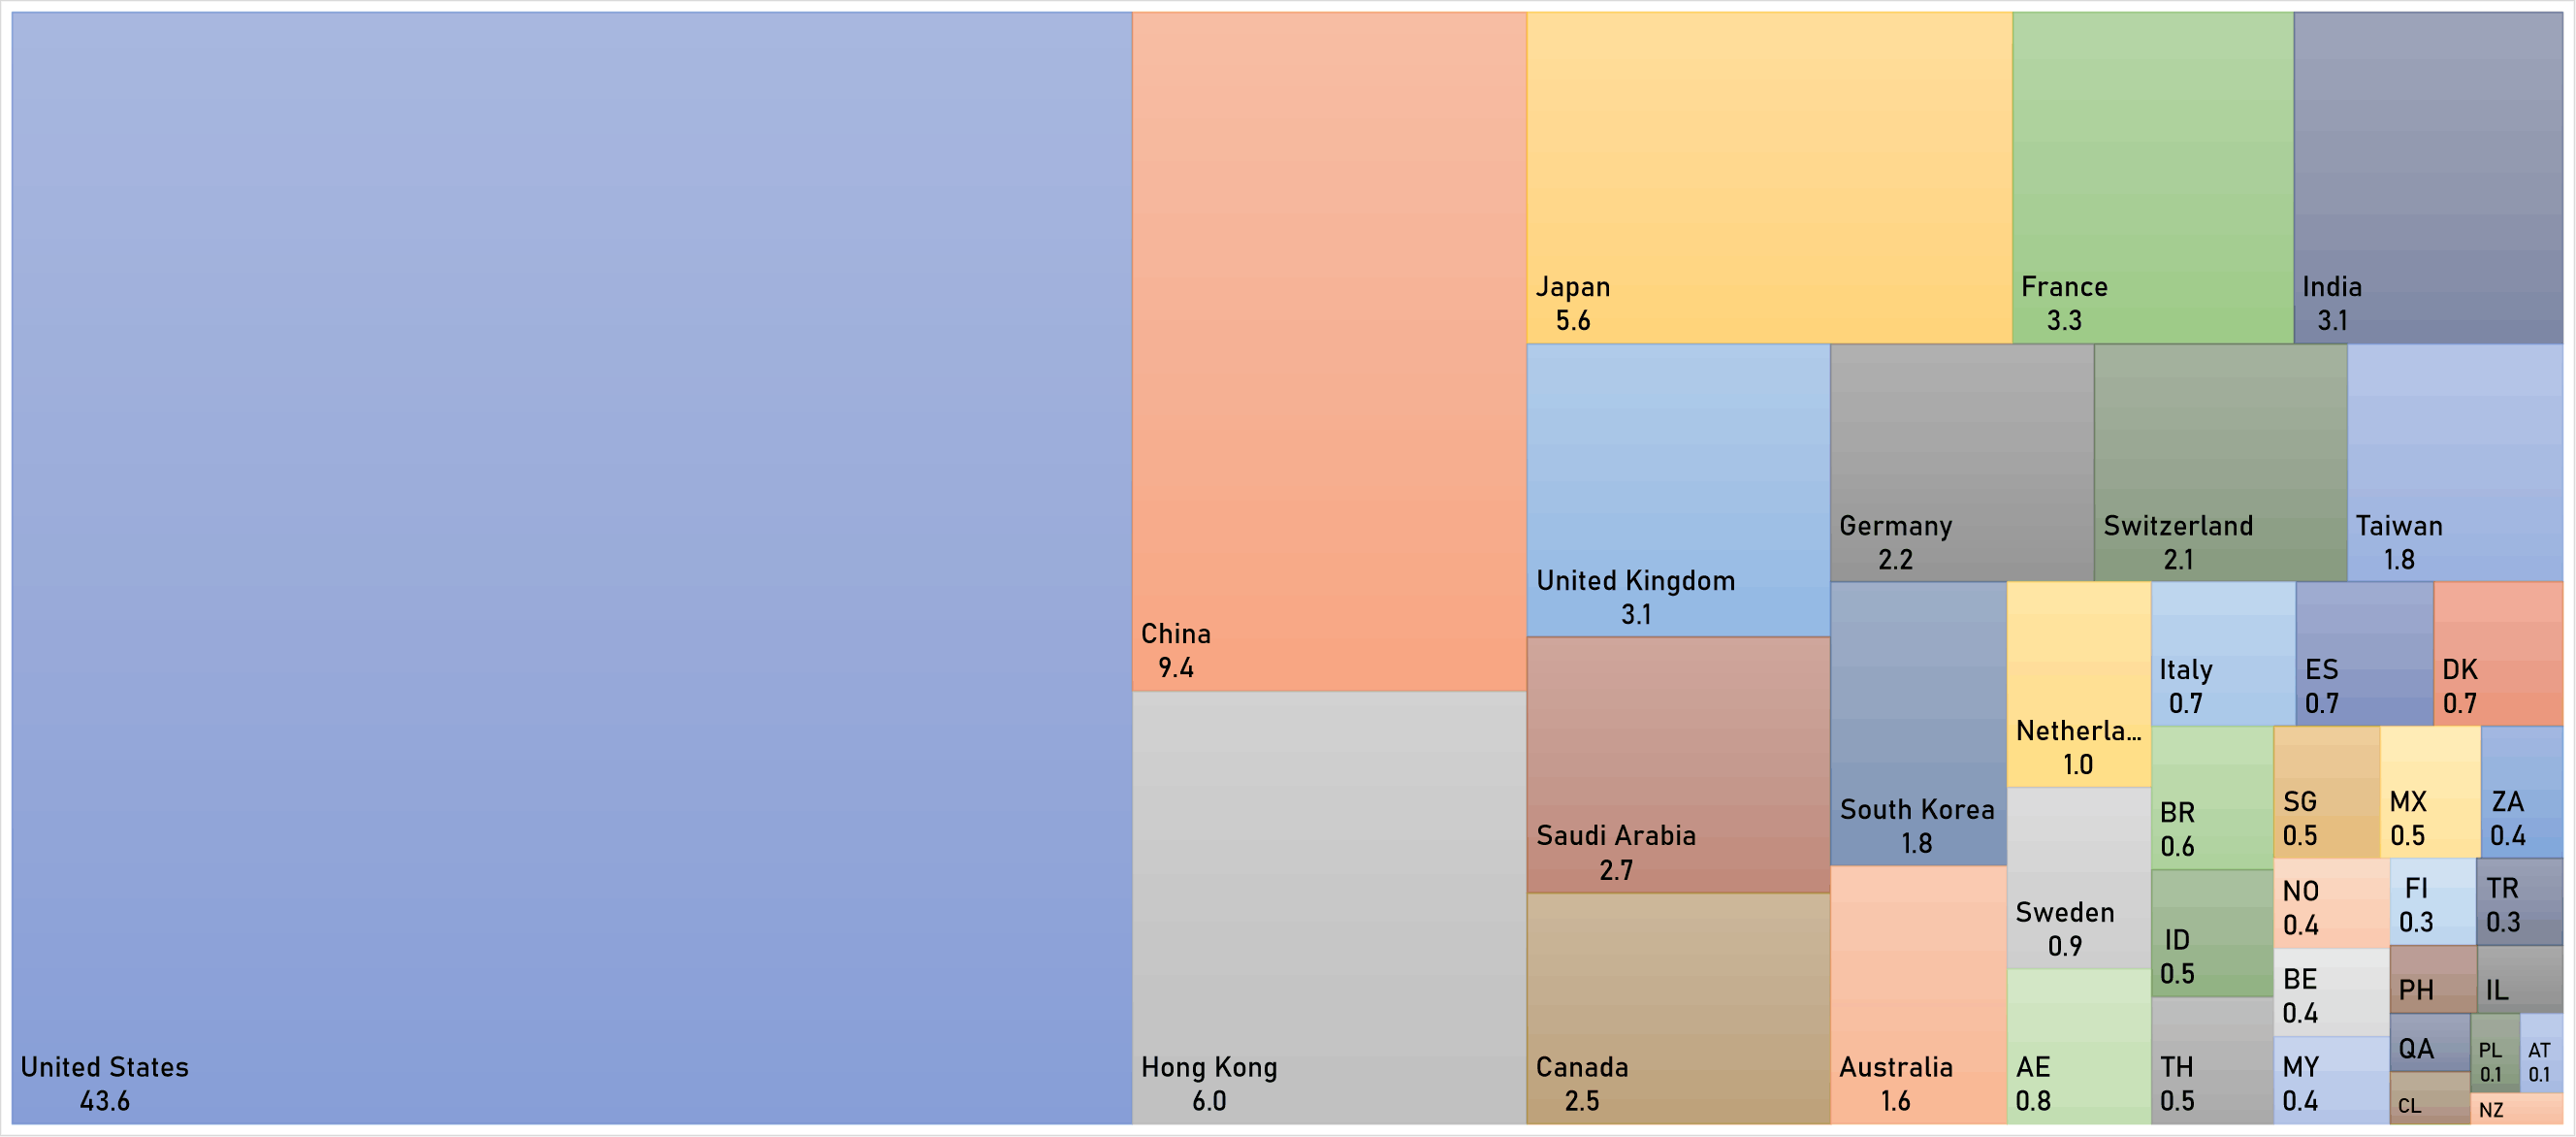 World Market Capitalization in US$ Trillion, broken down by country | Sources: phipost.com, FactSet data